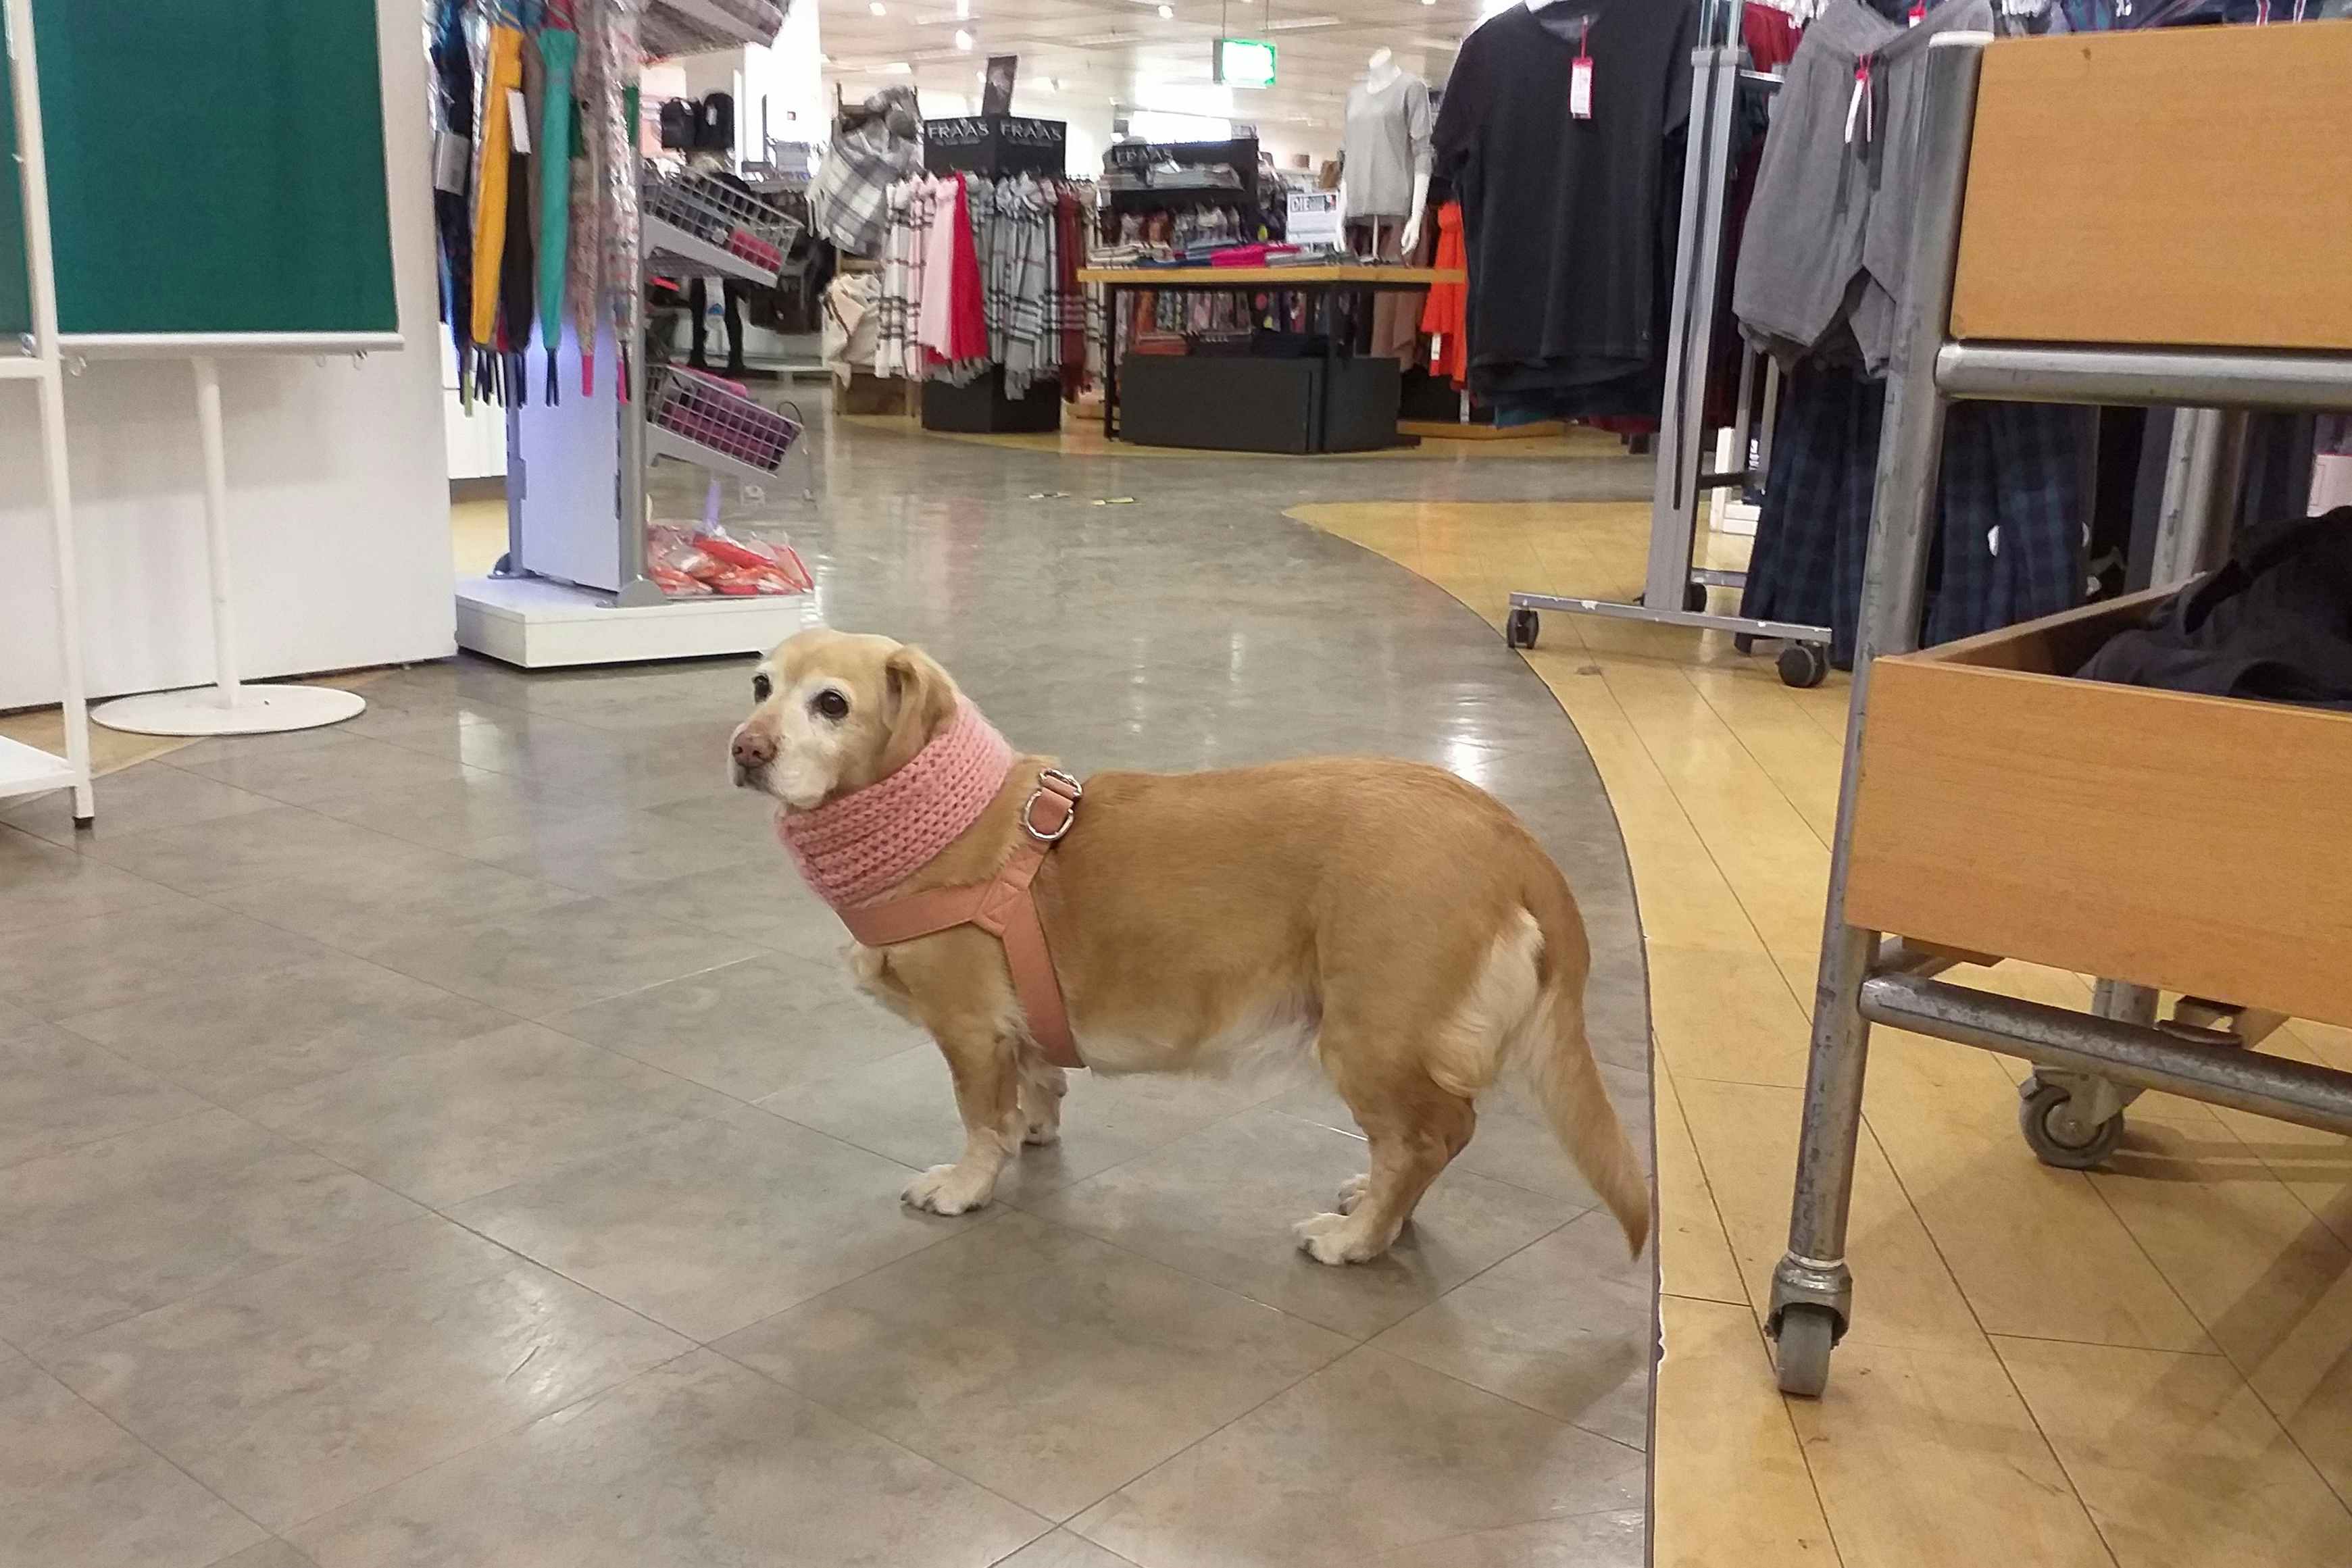 A dog in a pink sweater and harness inside a clothing store. 